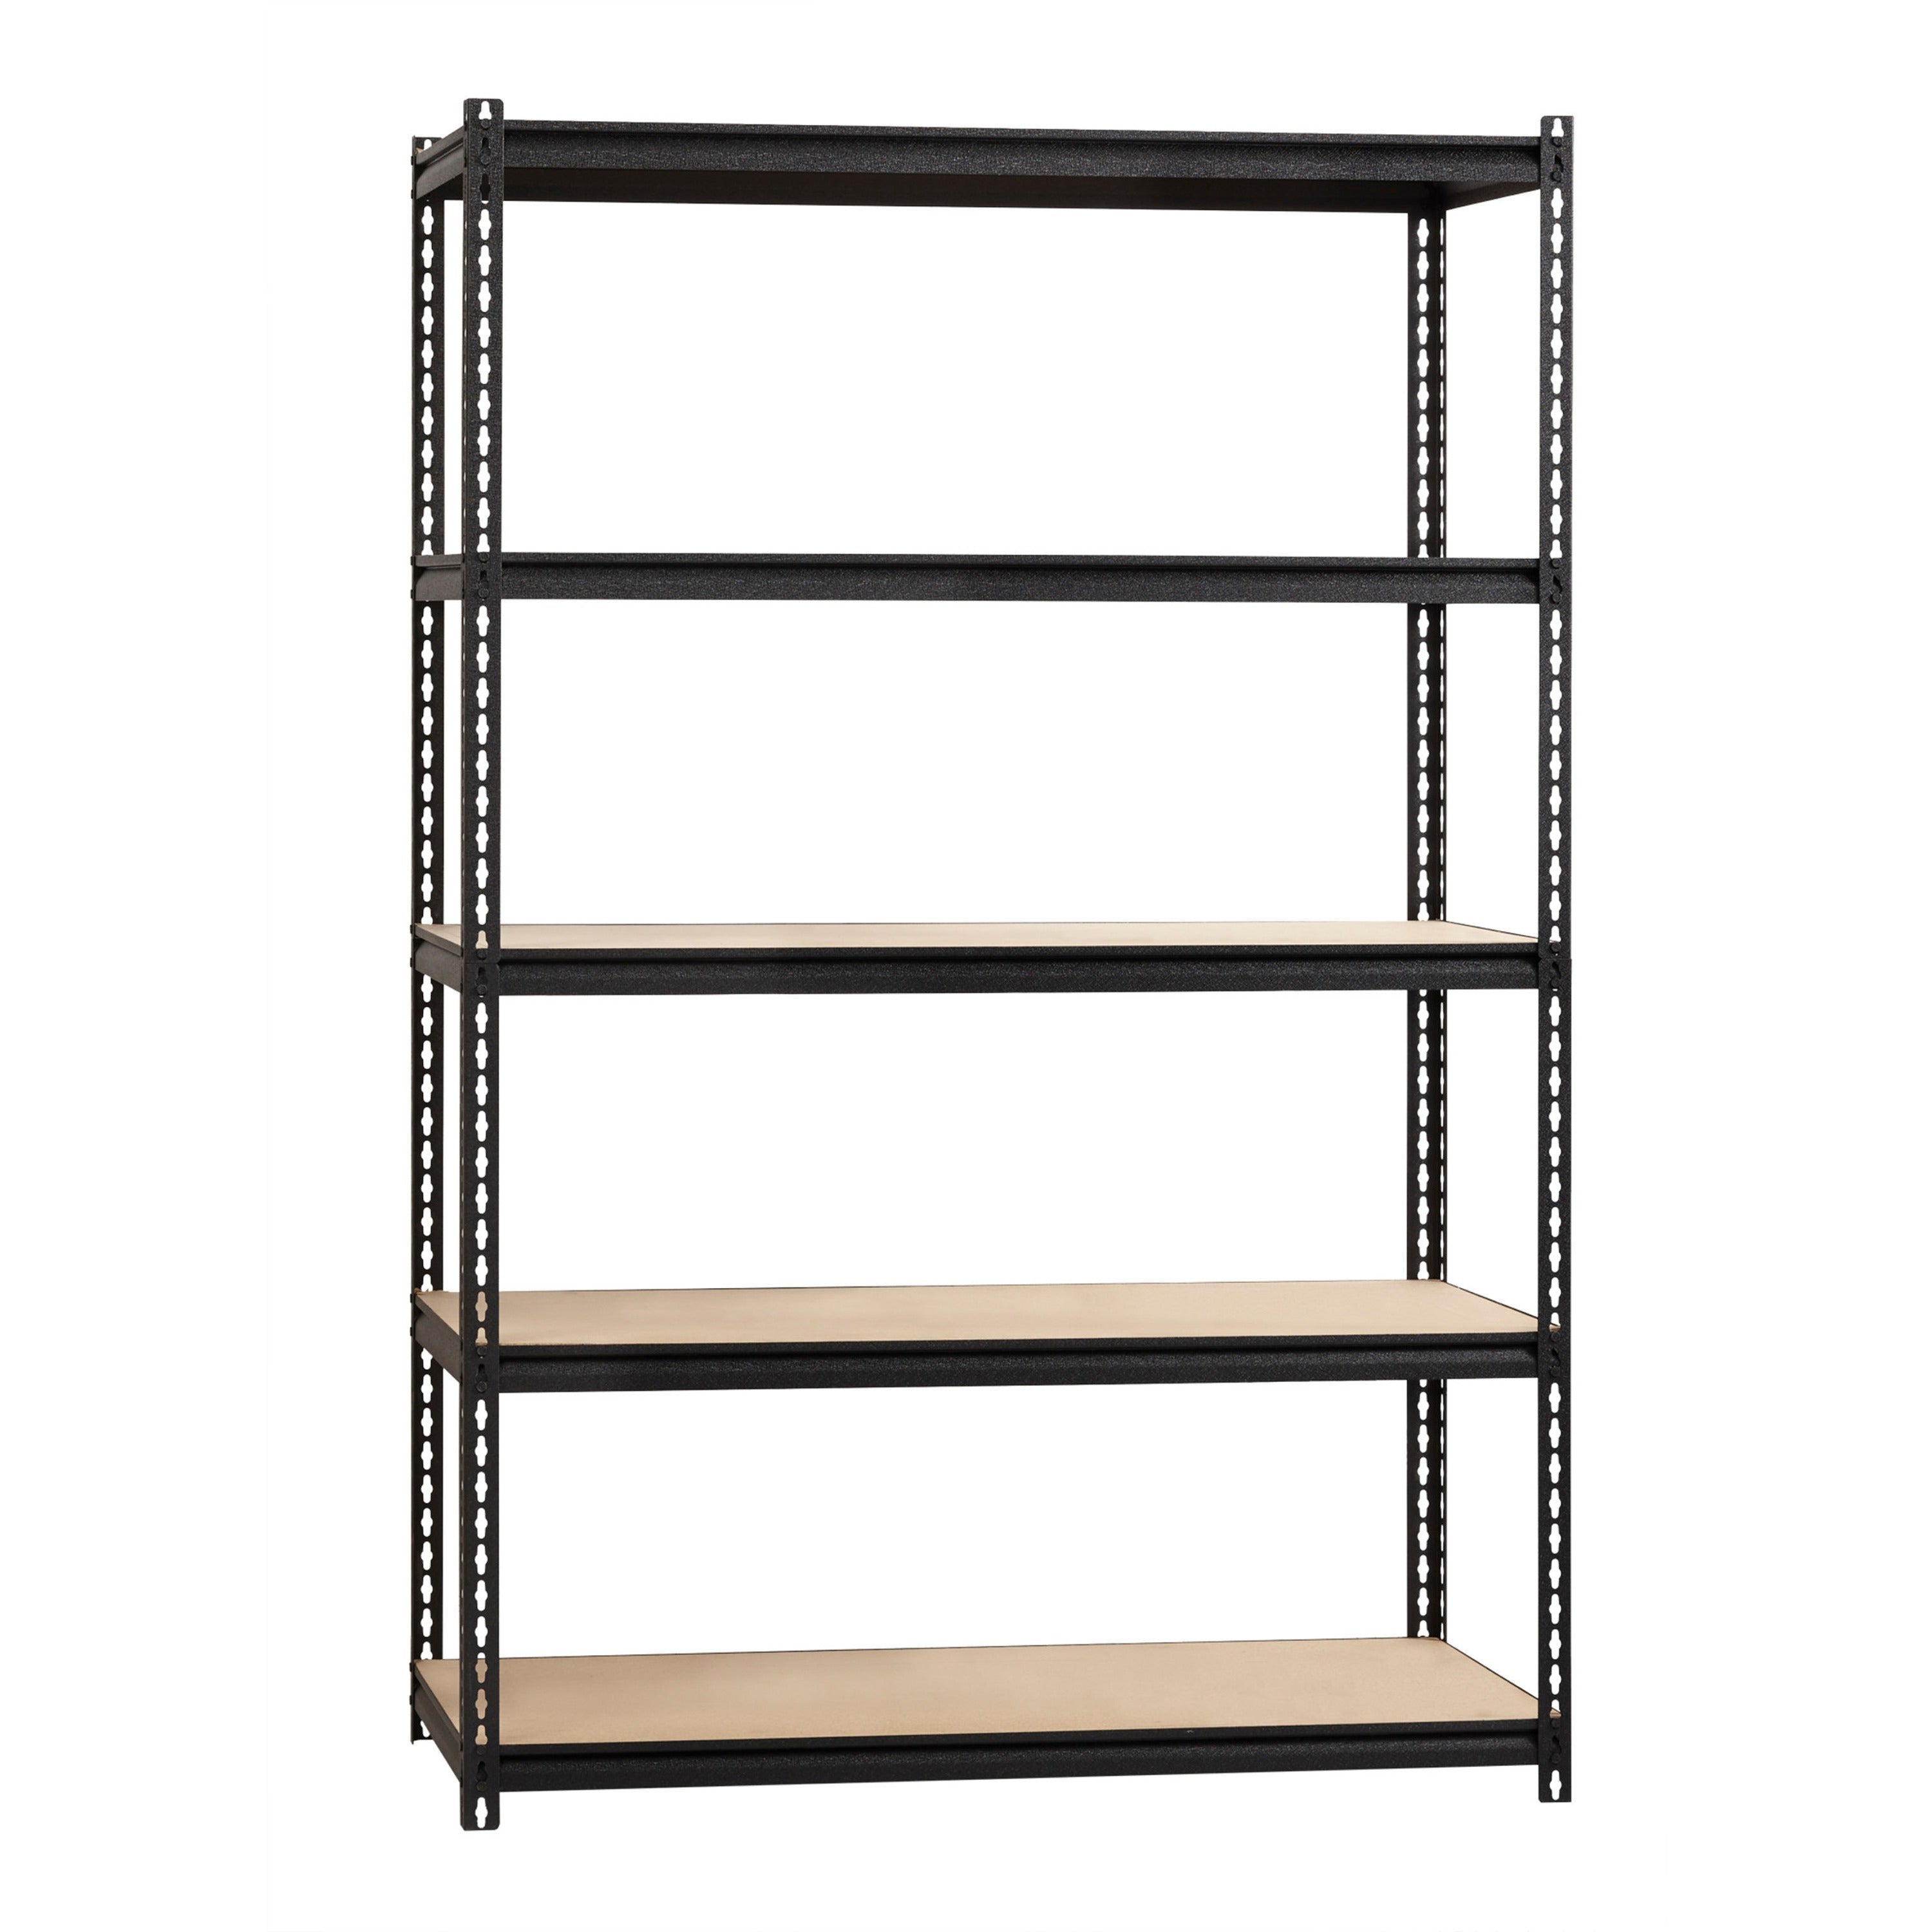 lorell-iron-horse-2300-lb-capacity-riveted-shelving-5-shelfves-72-height-x-48-width-x-18-depth-30%-recycled-black-steel-particleboard-1-each_llr59698 - 1